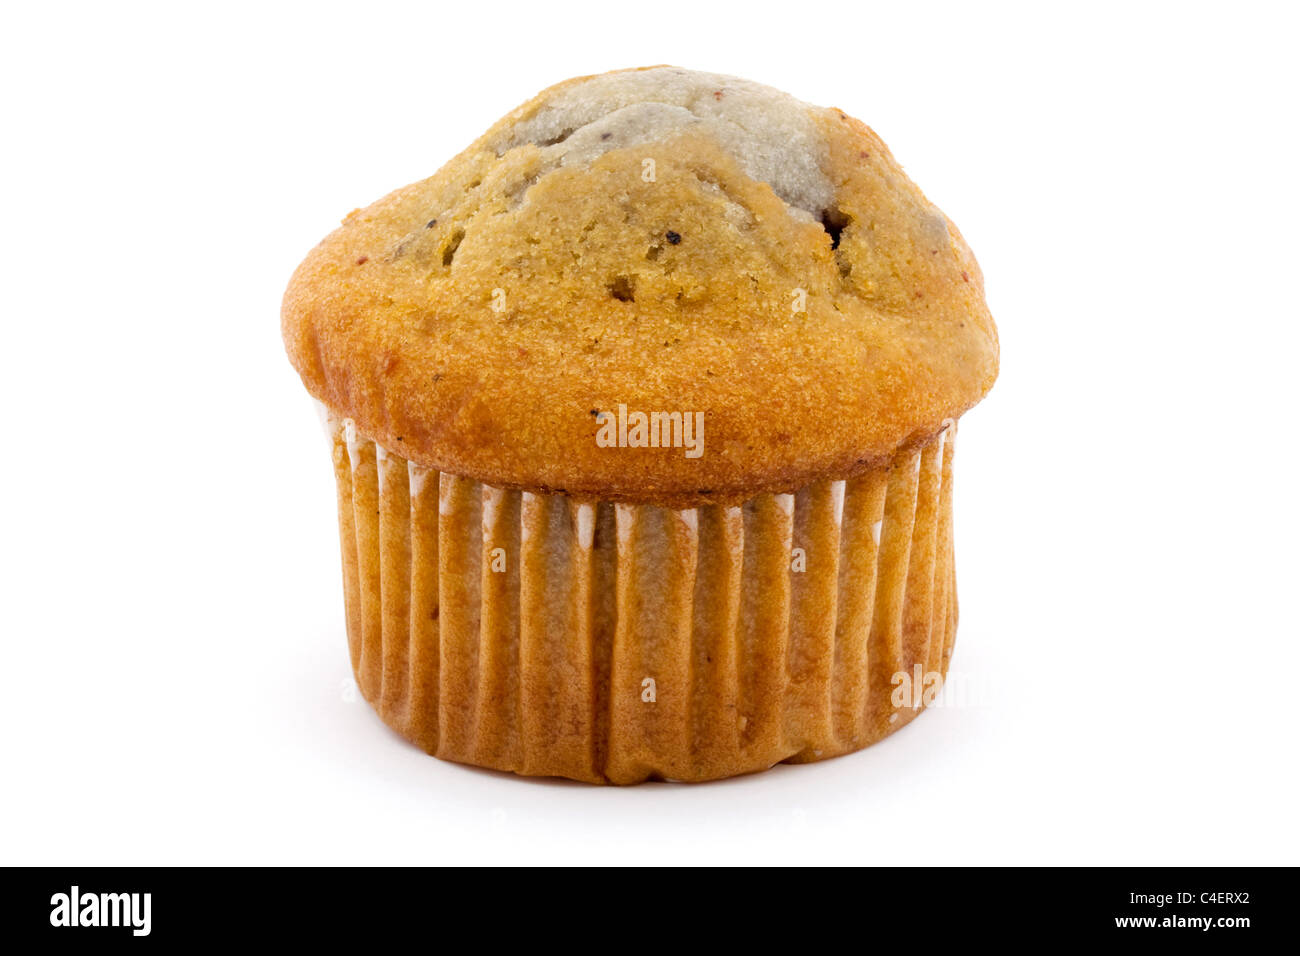 Muffins aux bleuets isolated on white Banque D'Images